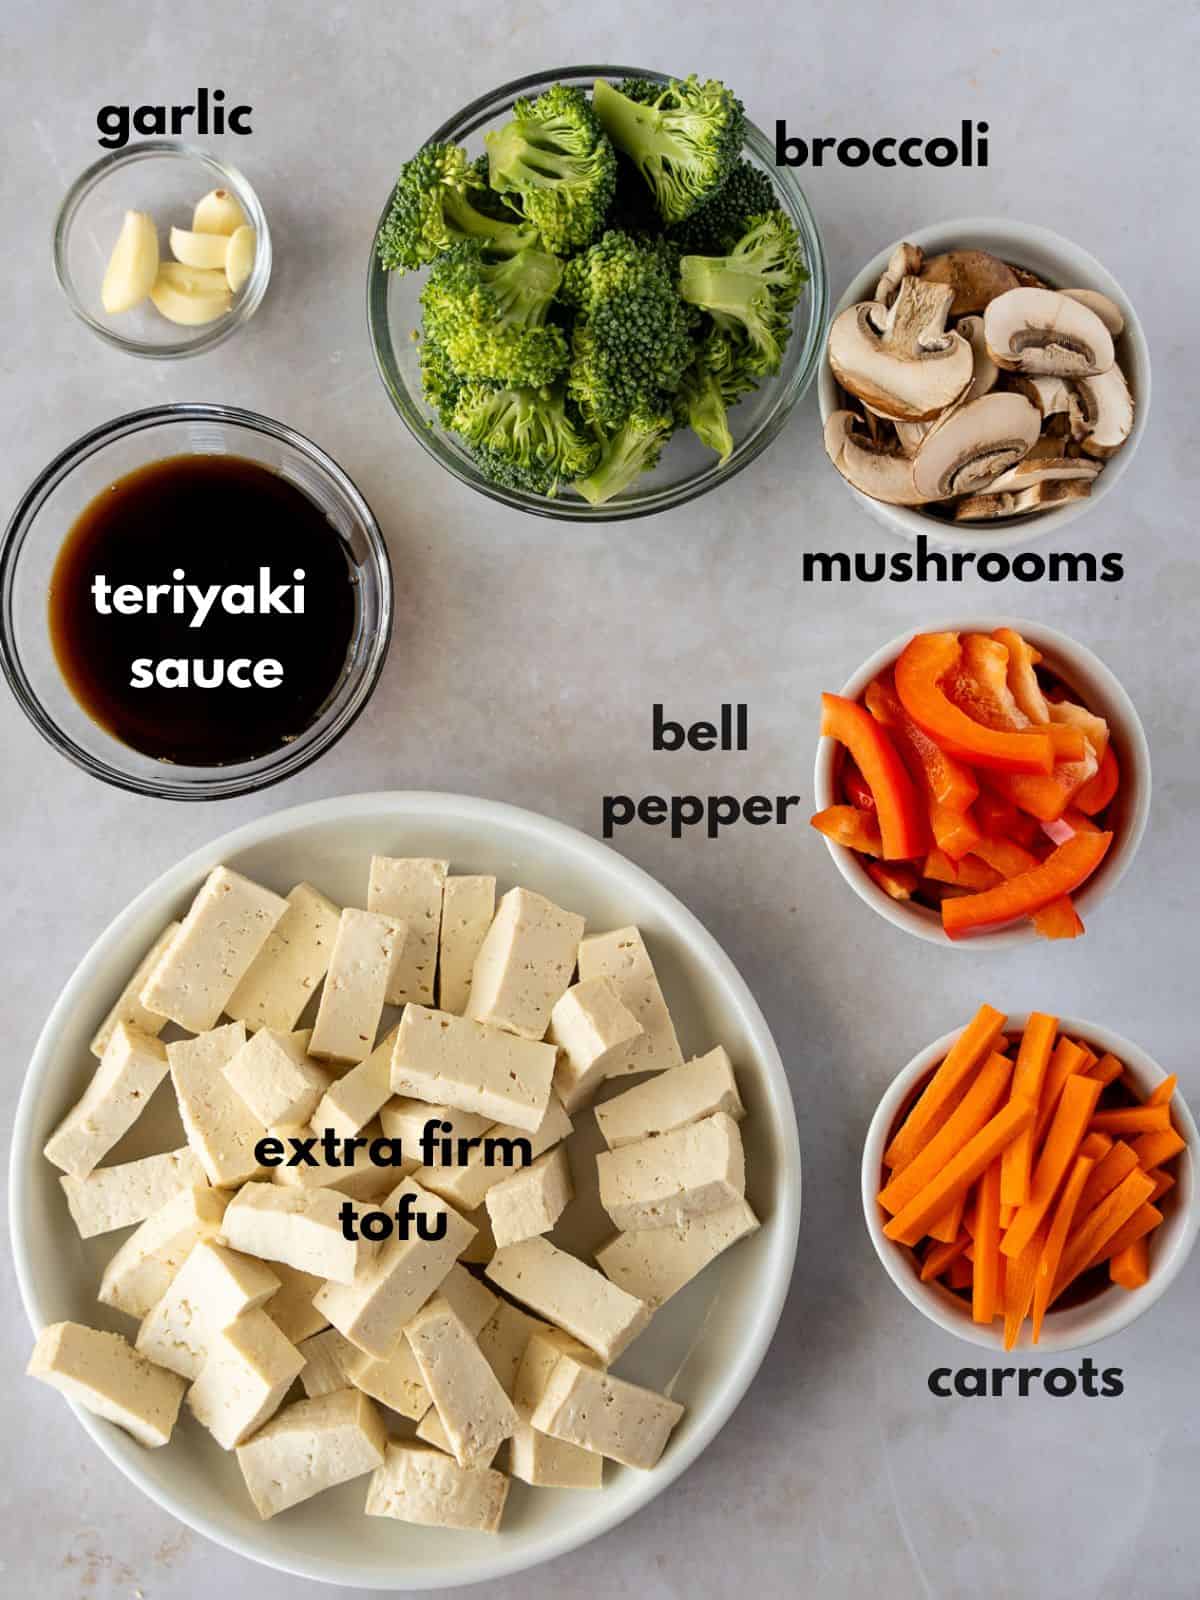 Ingredients labeled with text: (garlic, broccoli, teriyaki sauce, mushrooms, bell pepper, carrots, and tofu).